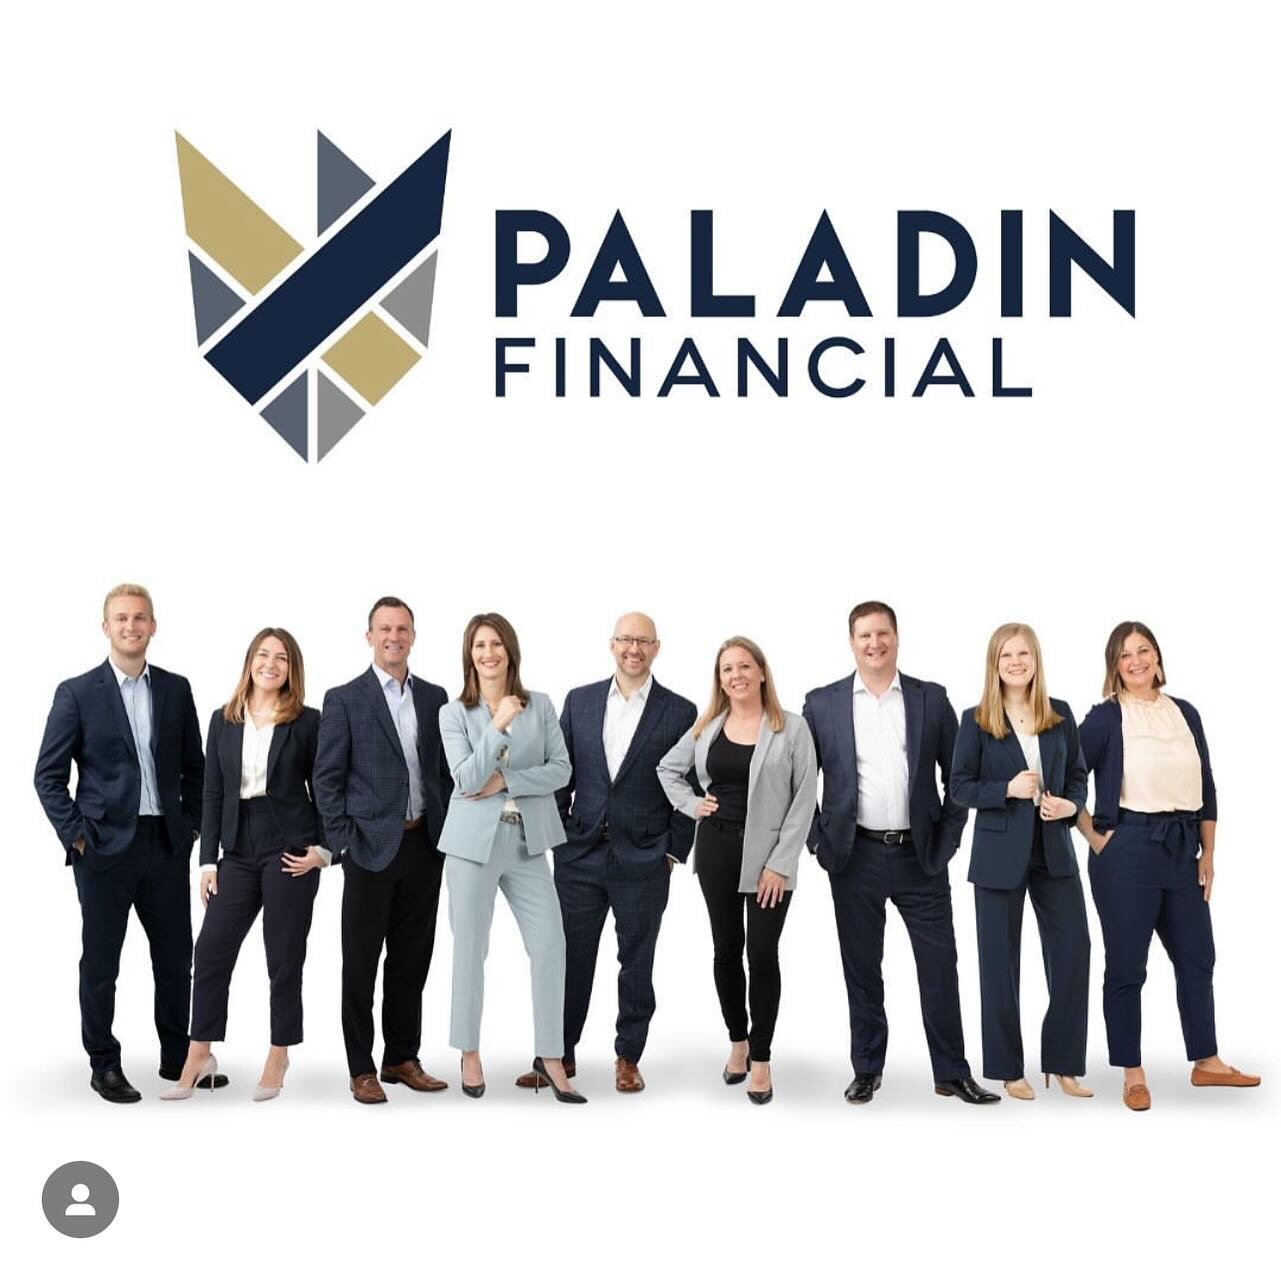 @paladin_financial team composite.  Book your team for headshots and composite photos. So many benefits! #teamcomposite #teamphoto #twincitiesheadshotphotographer #photographer